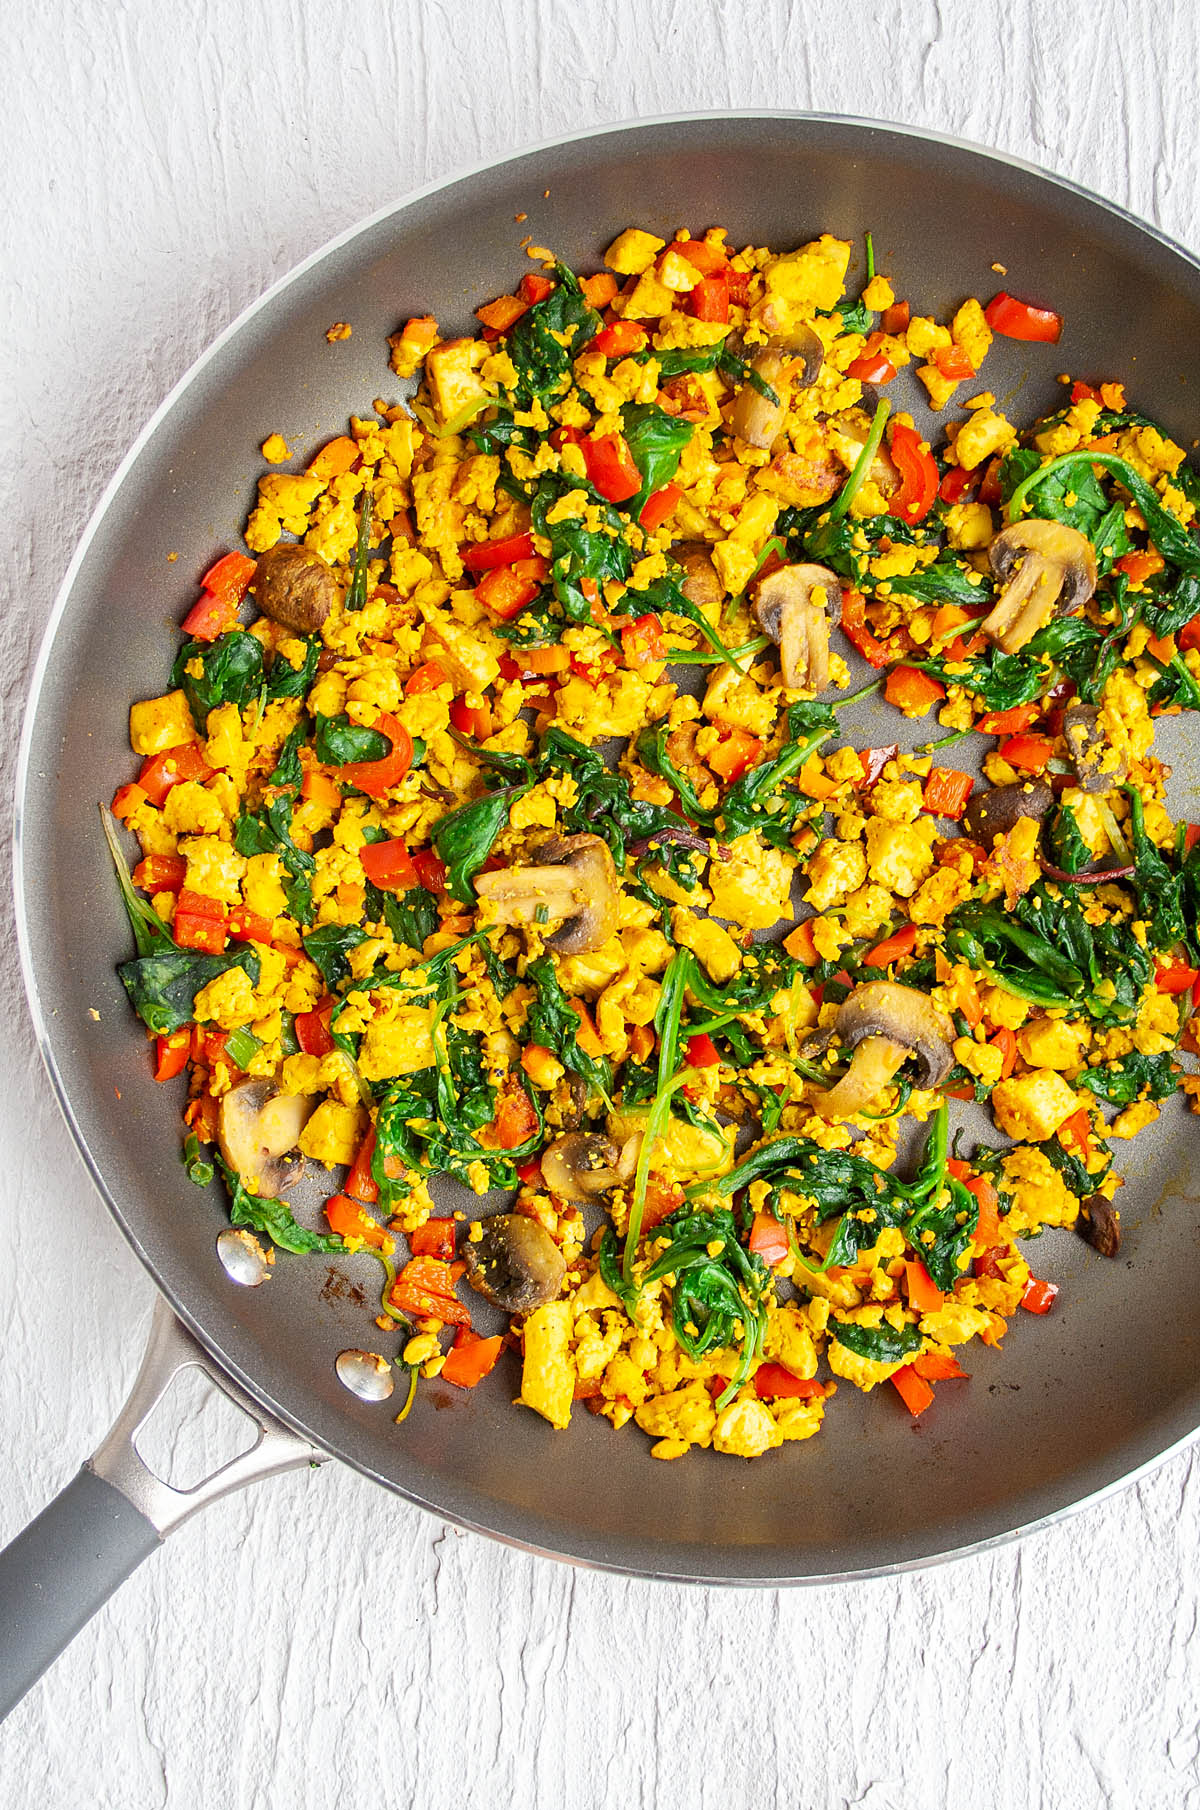 Tofu Scramble in a skillet after adding spinach and cooking.